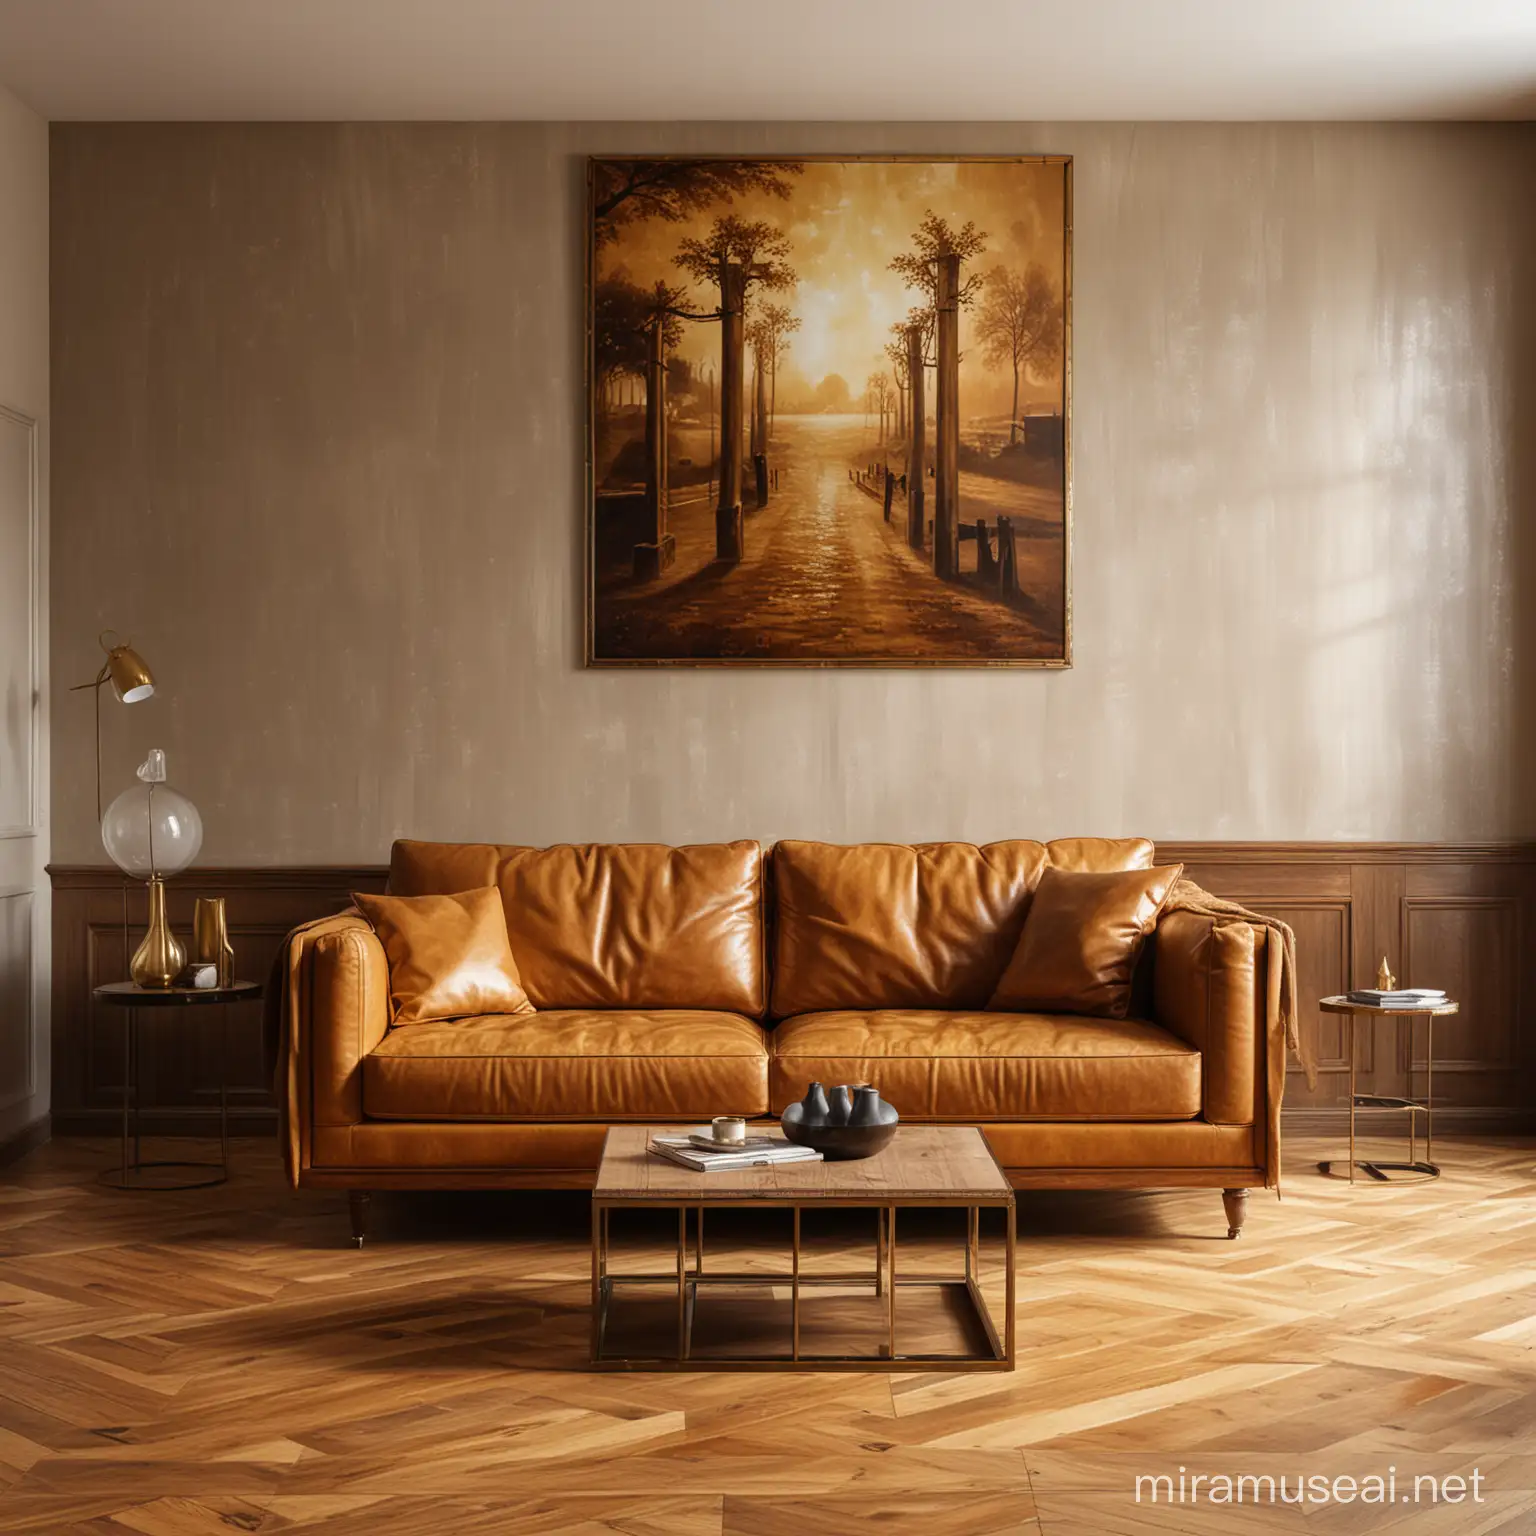 A living room with wooden floor and wooden posts in gold and brown, behind the golden leather sofa hangs a square picture, vivid, detailed, light and shadow